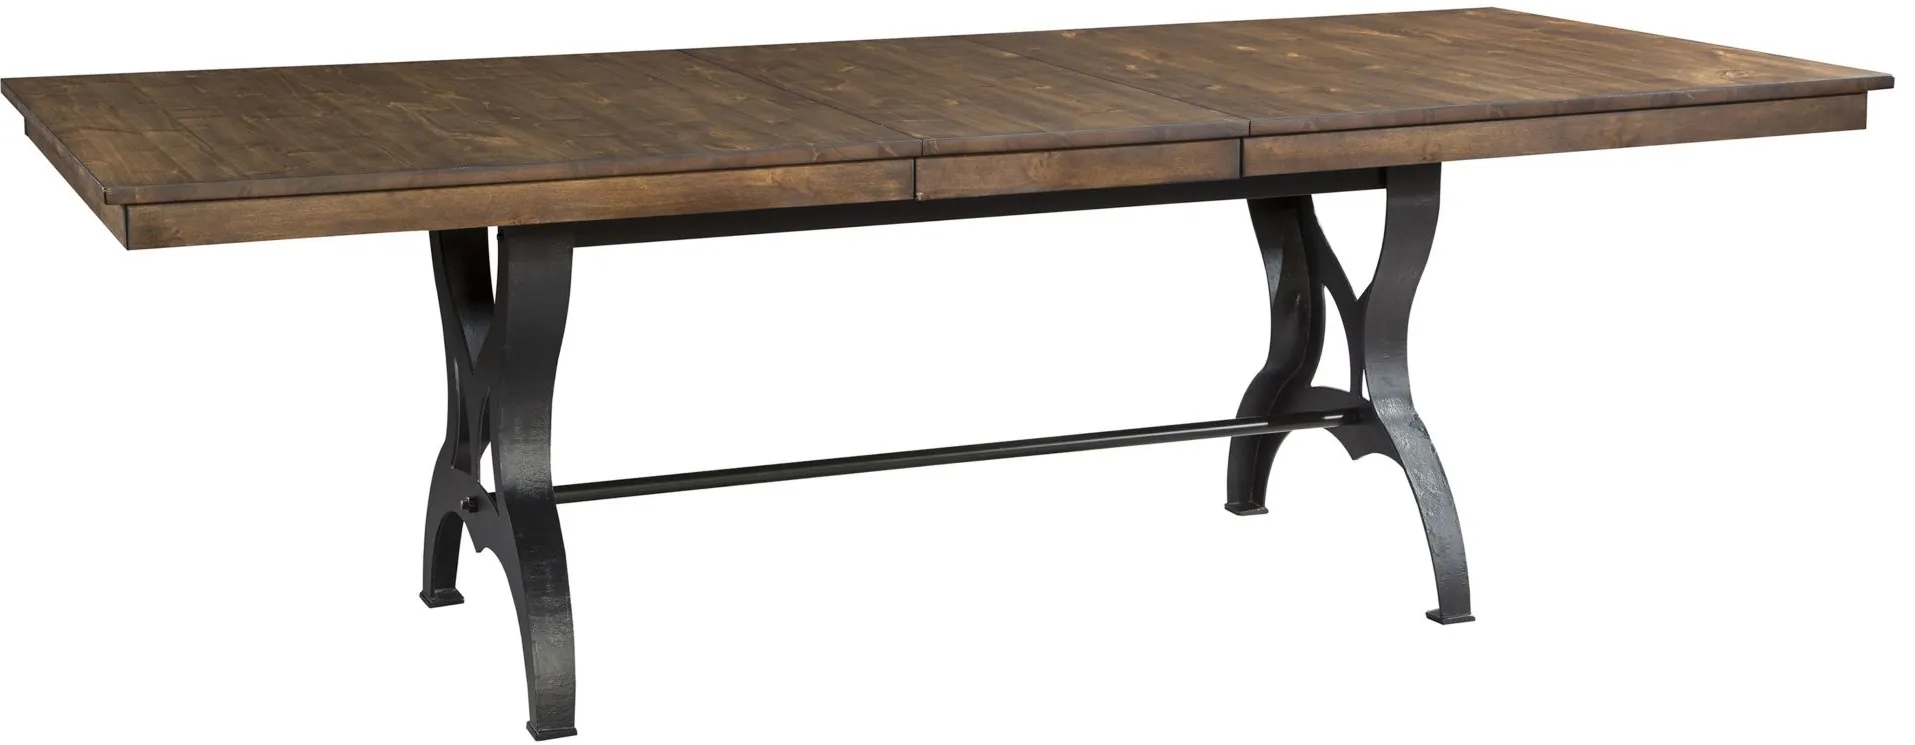 District Dining Table in Copper by Intercon